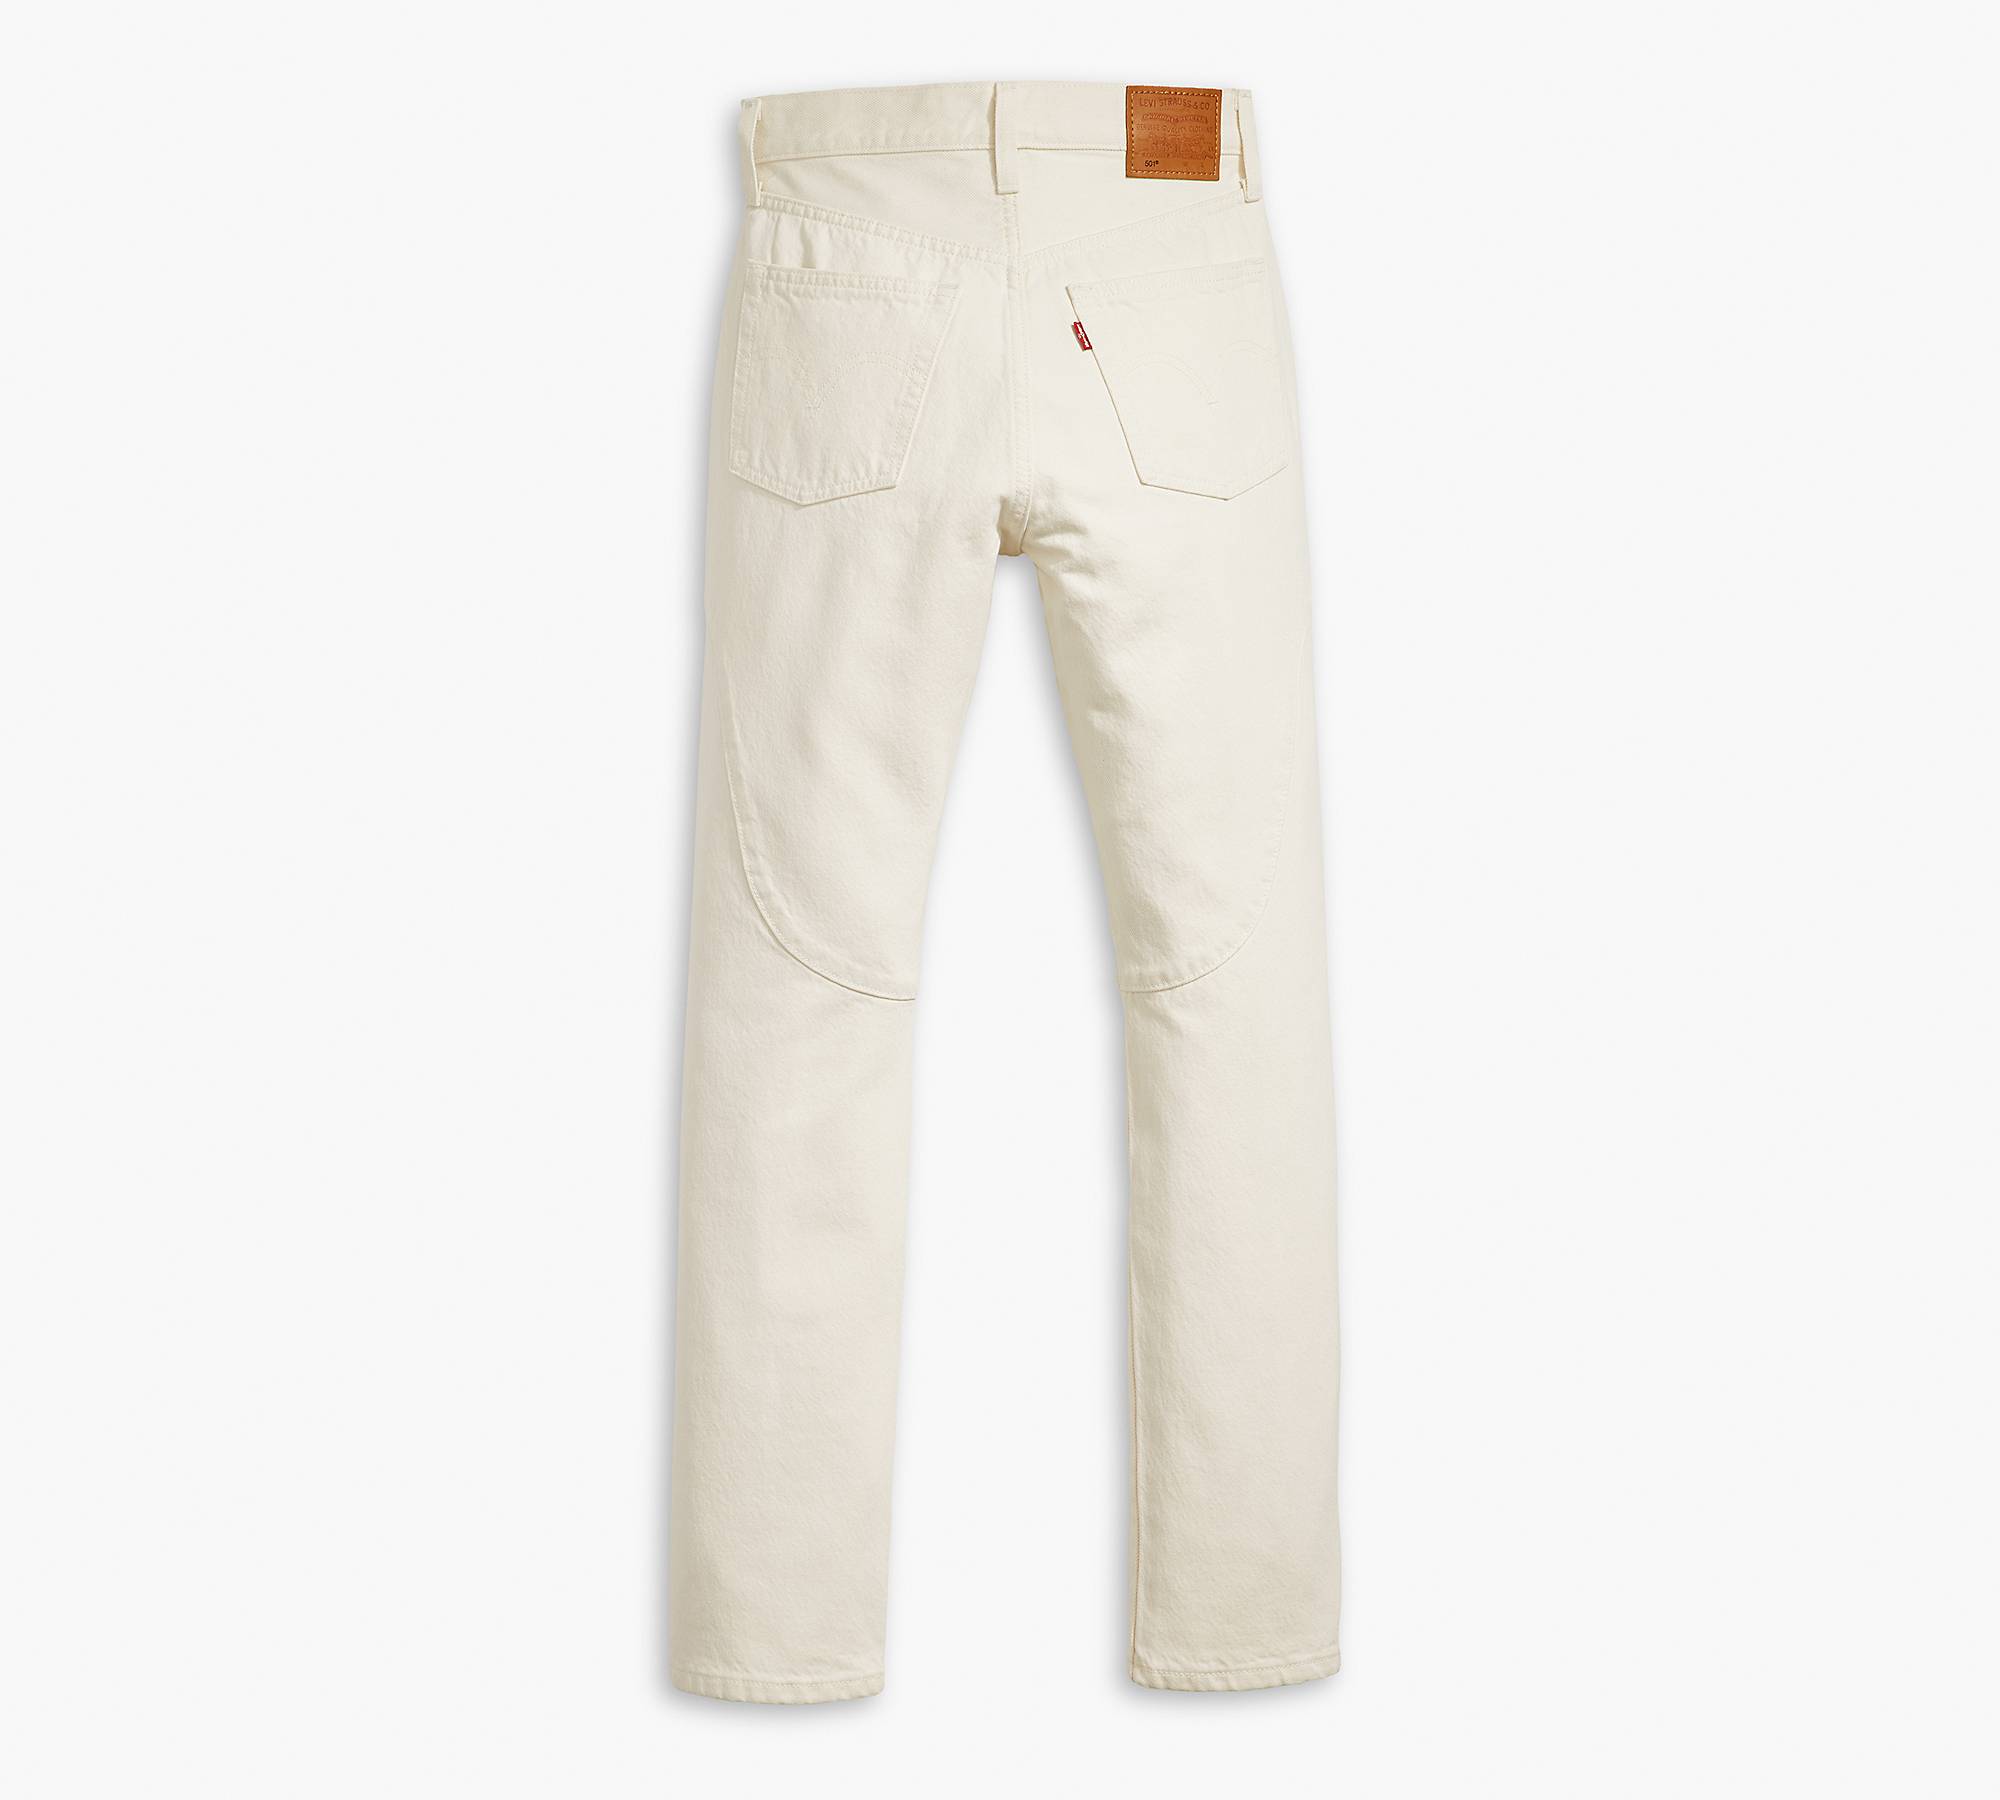 Levi white jeans, a renowned denim brand, offers a wide range of white jeans styles suitable for various occasions and preferences.